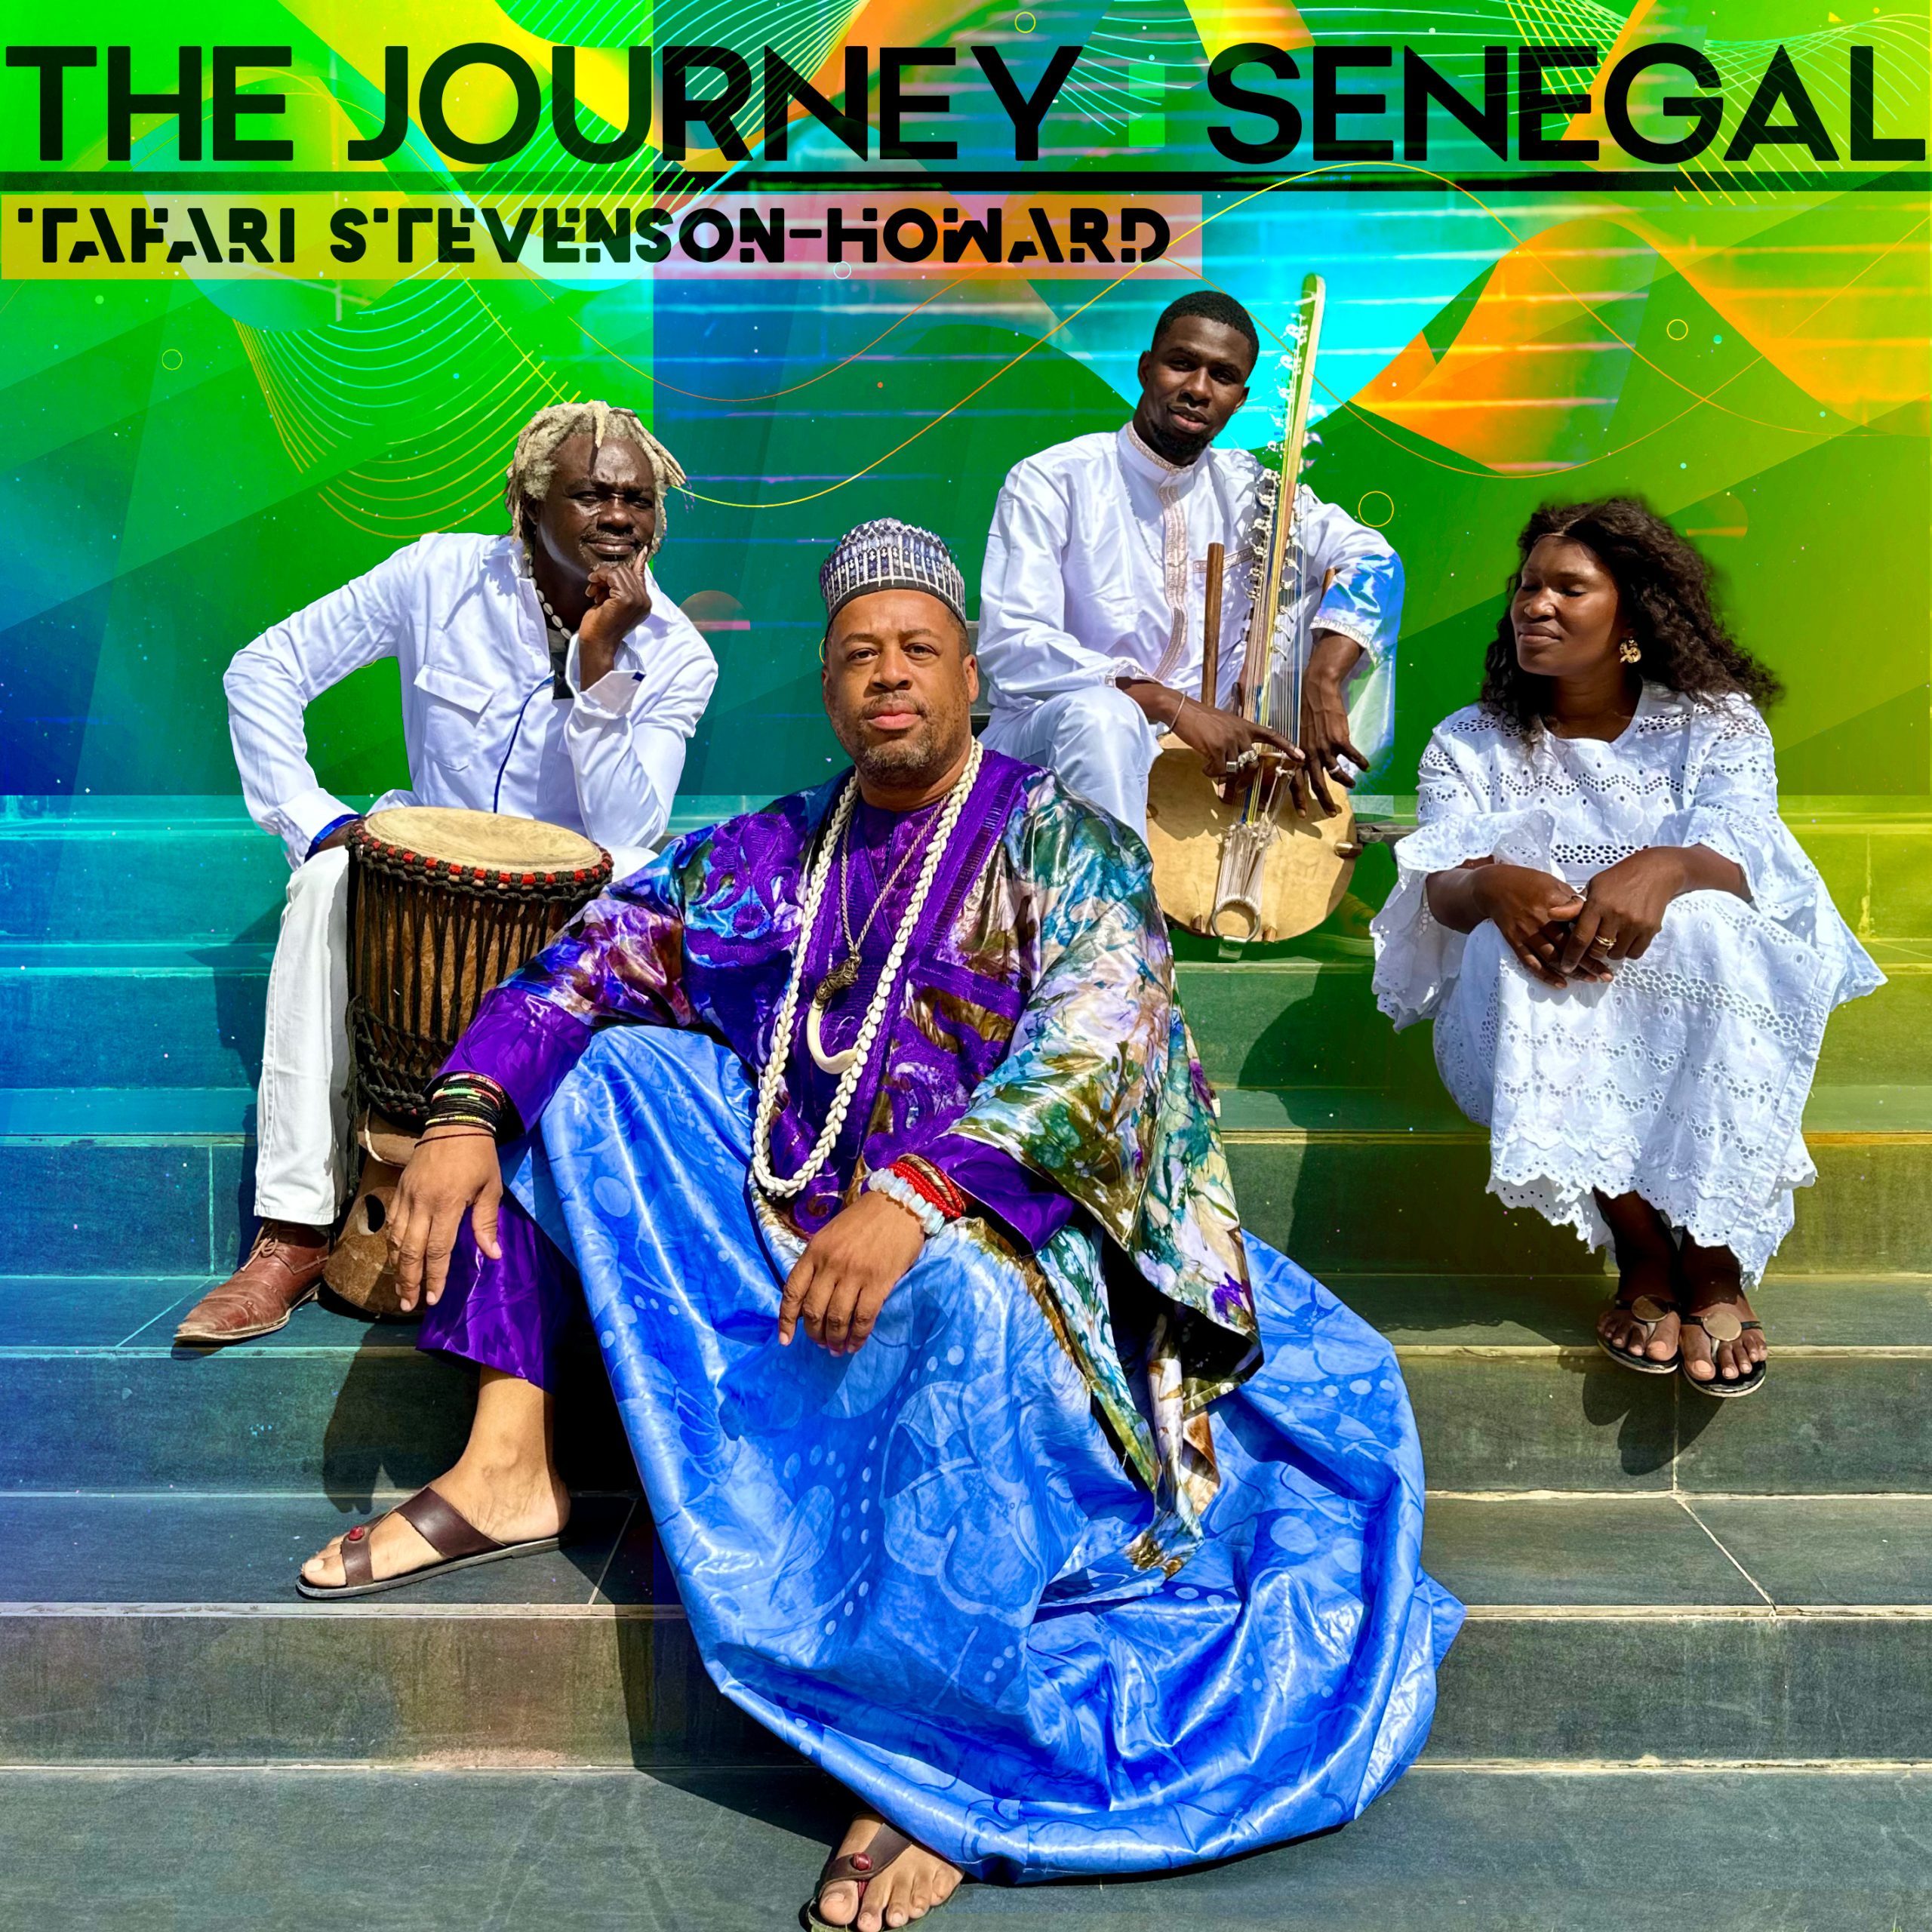 The Journey: Senegal… is Here!